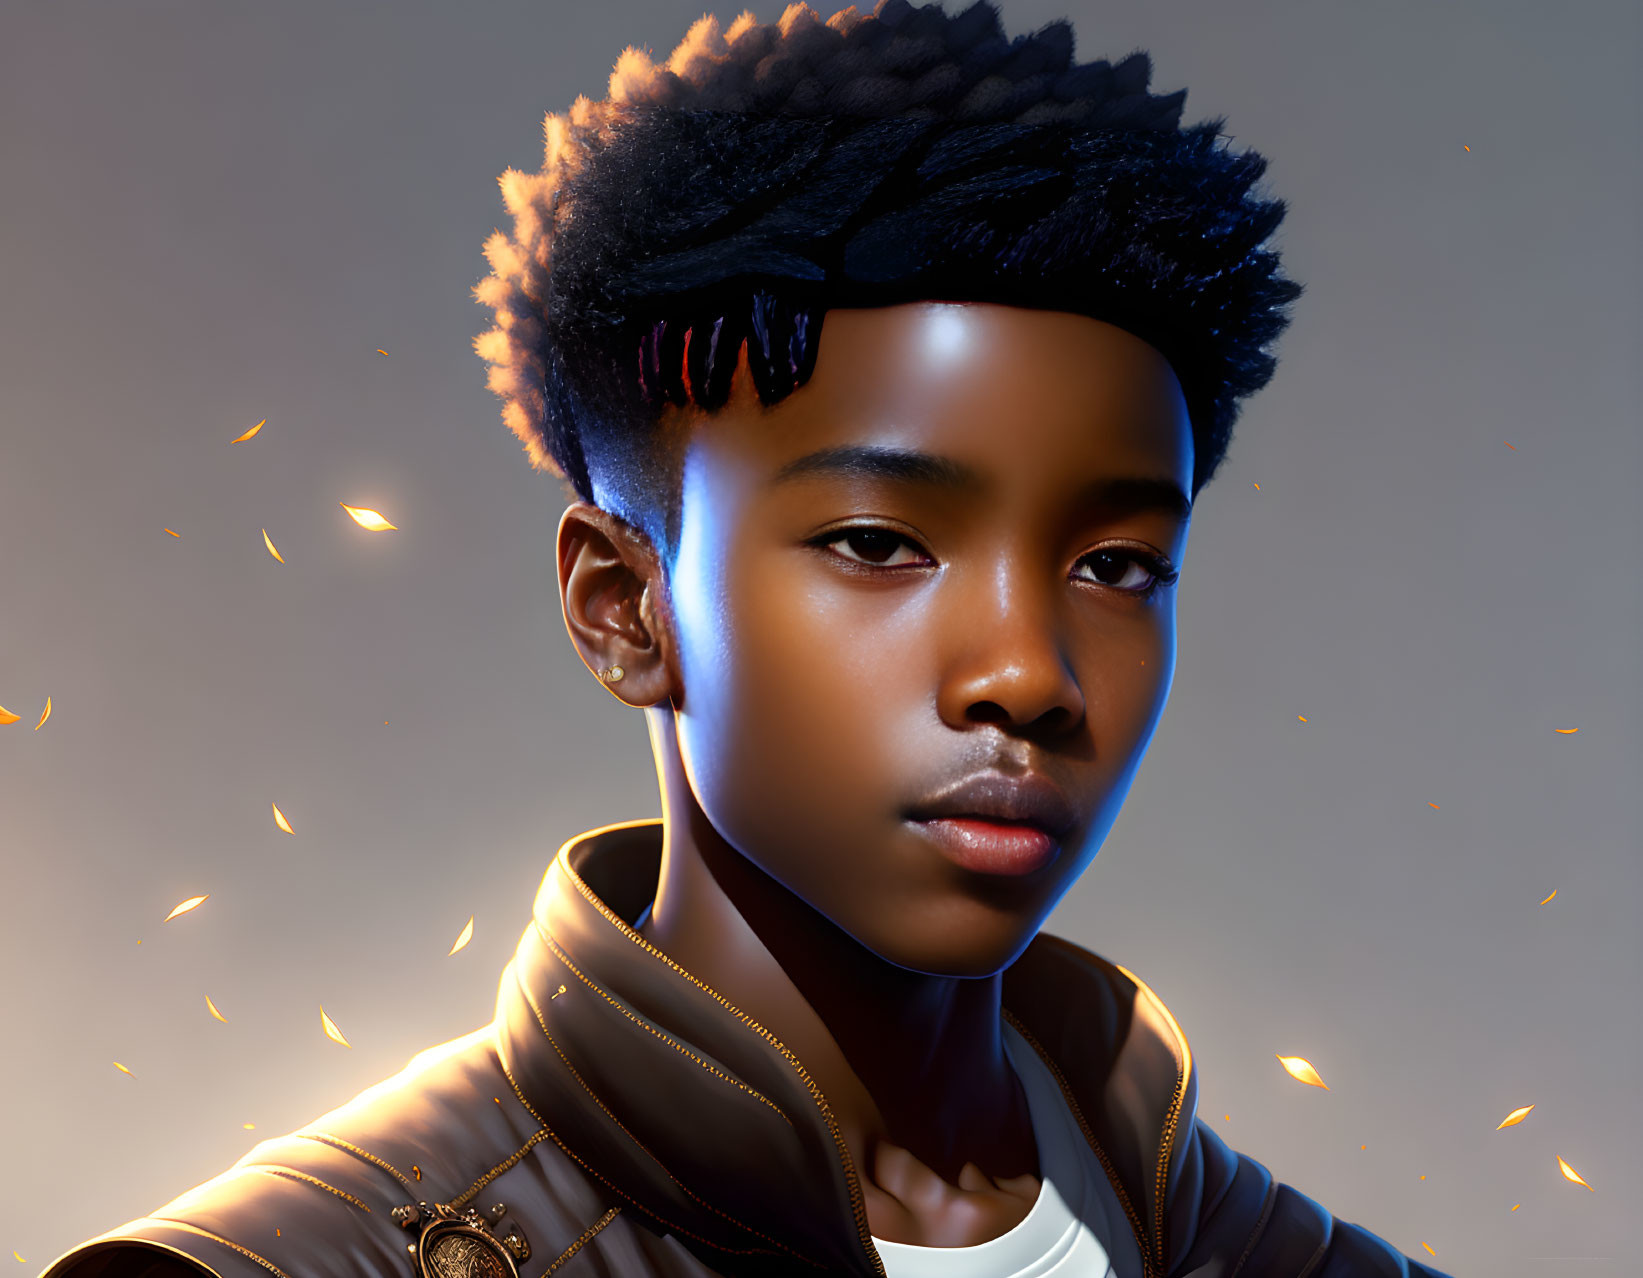 Digital portrait of young male with unique hairstyle, highlights, jacket, sparks background